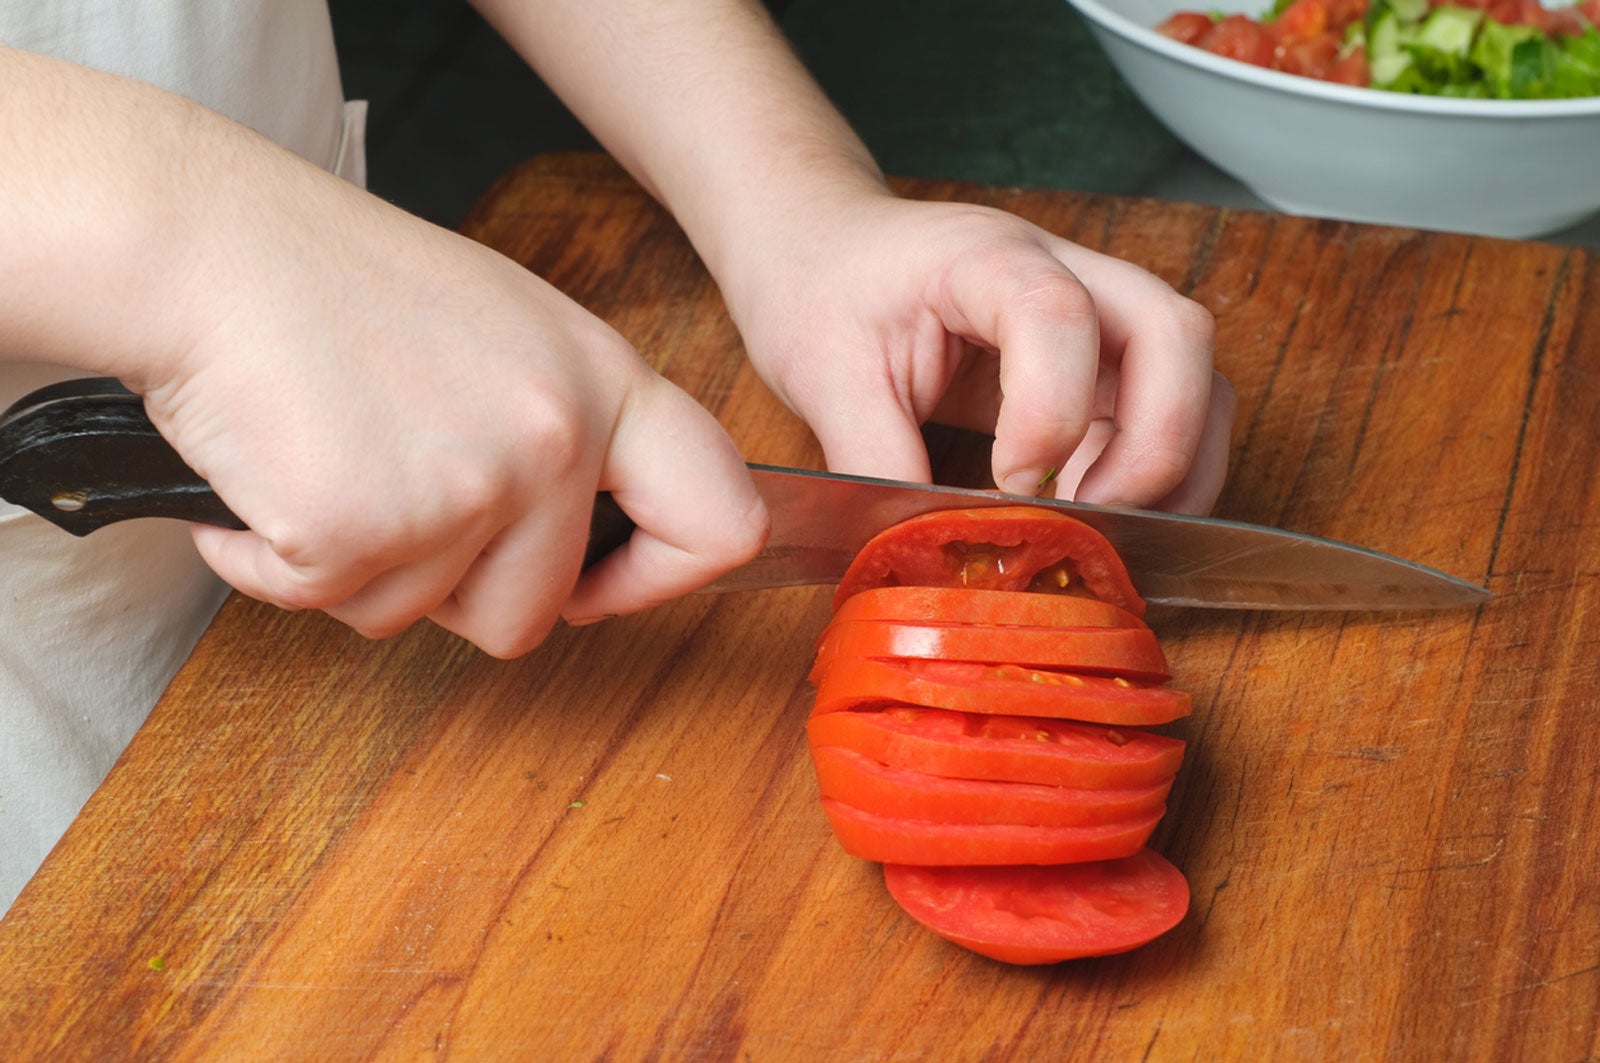 The Best Tomatoes Call for the Best Tomato Knife